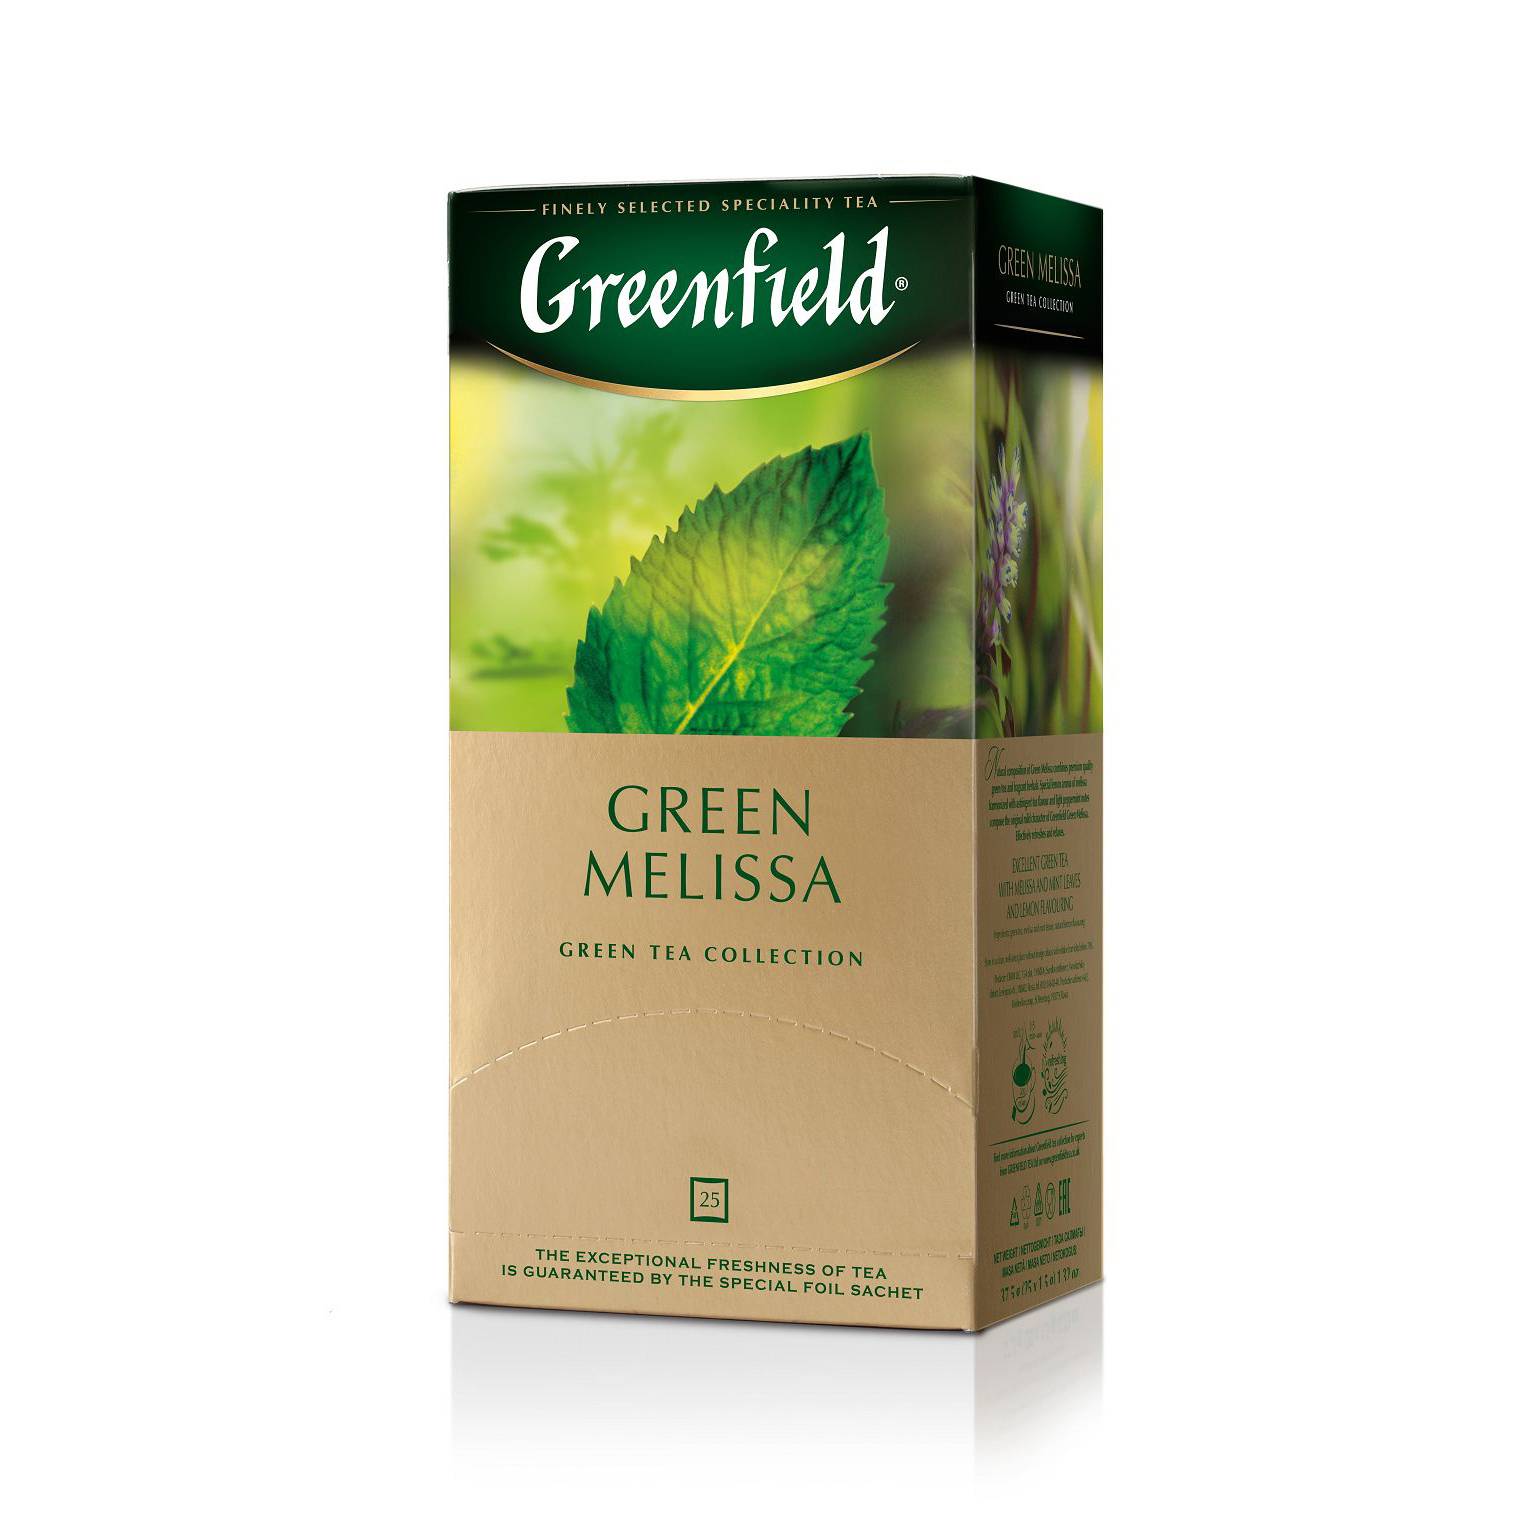 Greenfield Green Melissa pac image